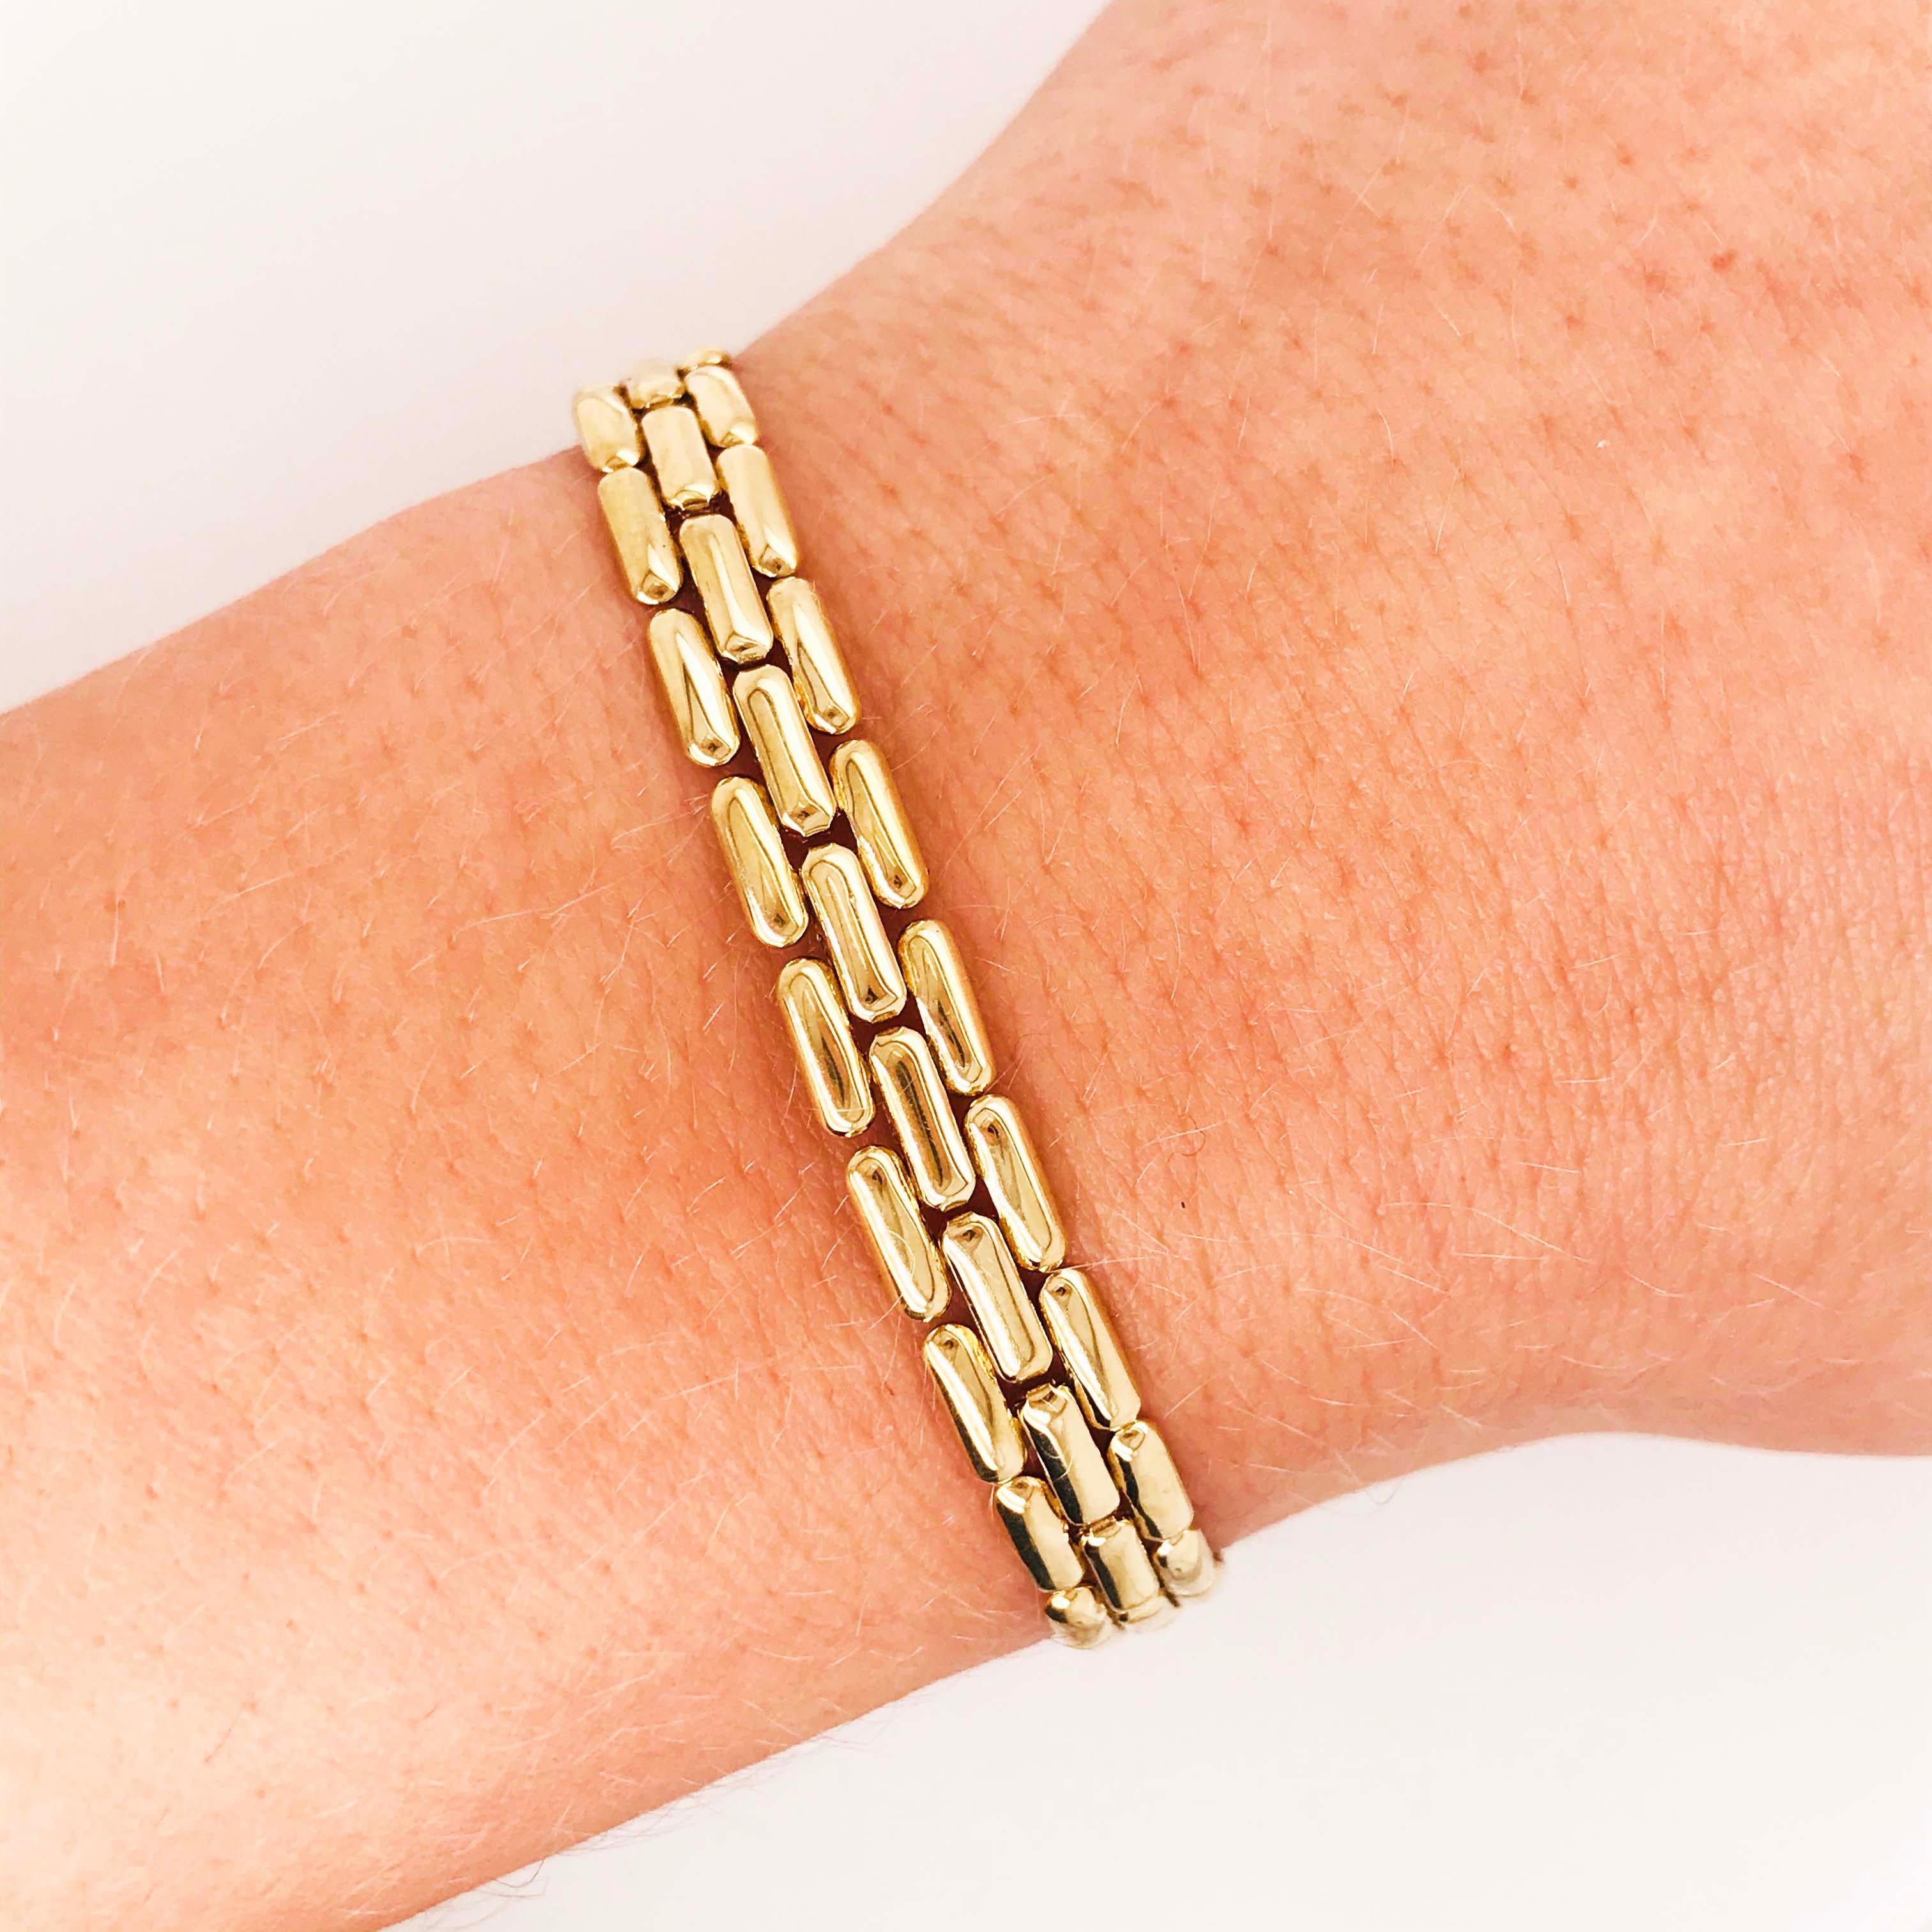 This is a genuine Panther chain bracelet with handmade links in 14k gold. The links are 14k yellow gold with white gold links in the middle. This Panther chain is a flat, smooth design that sits flat and flush on the wrist and hand. The chain is